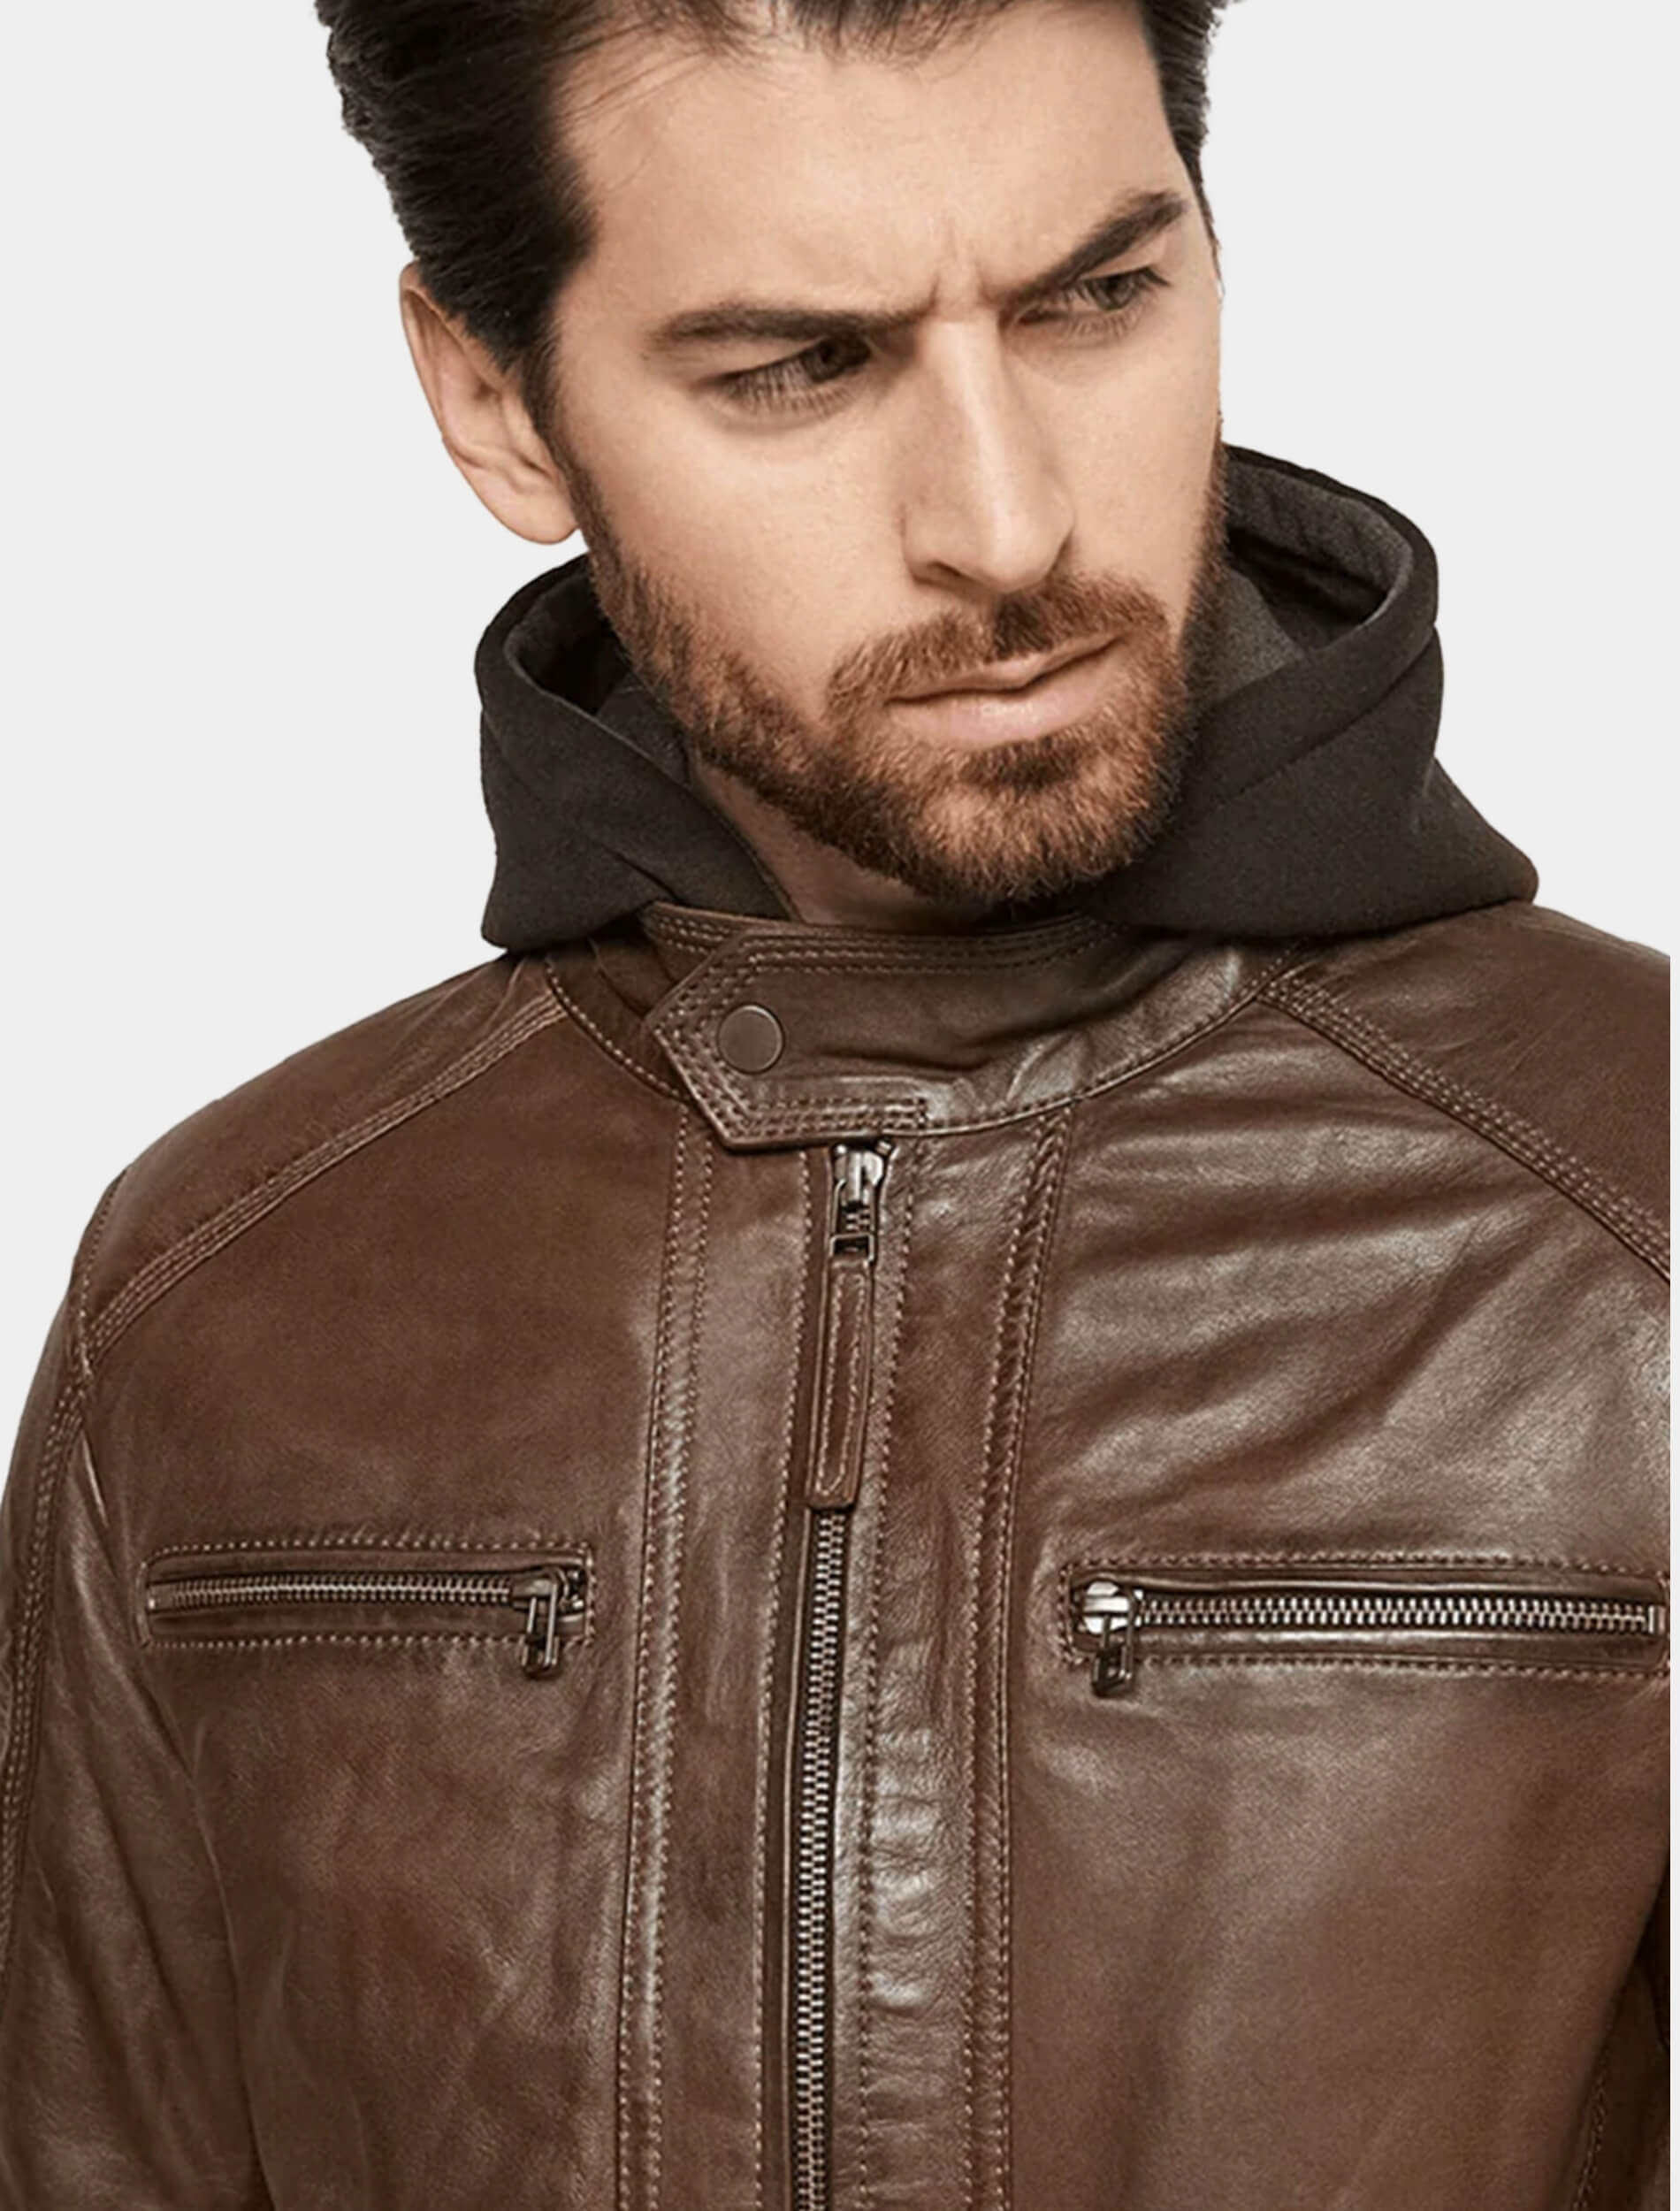 Shop Mens Leather Jacket With Hood [New Edition For Winter]